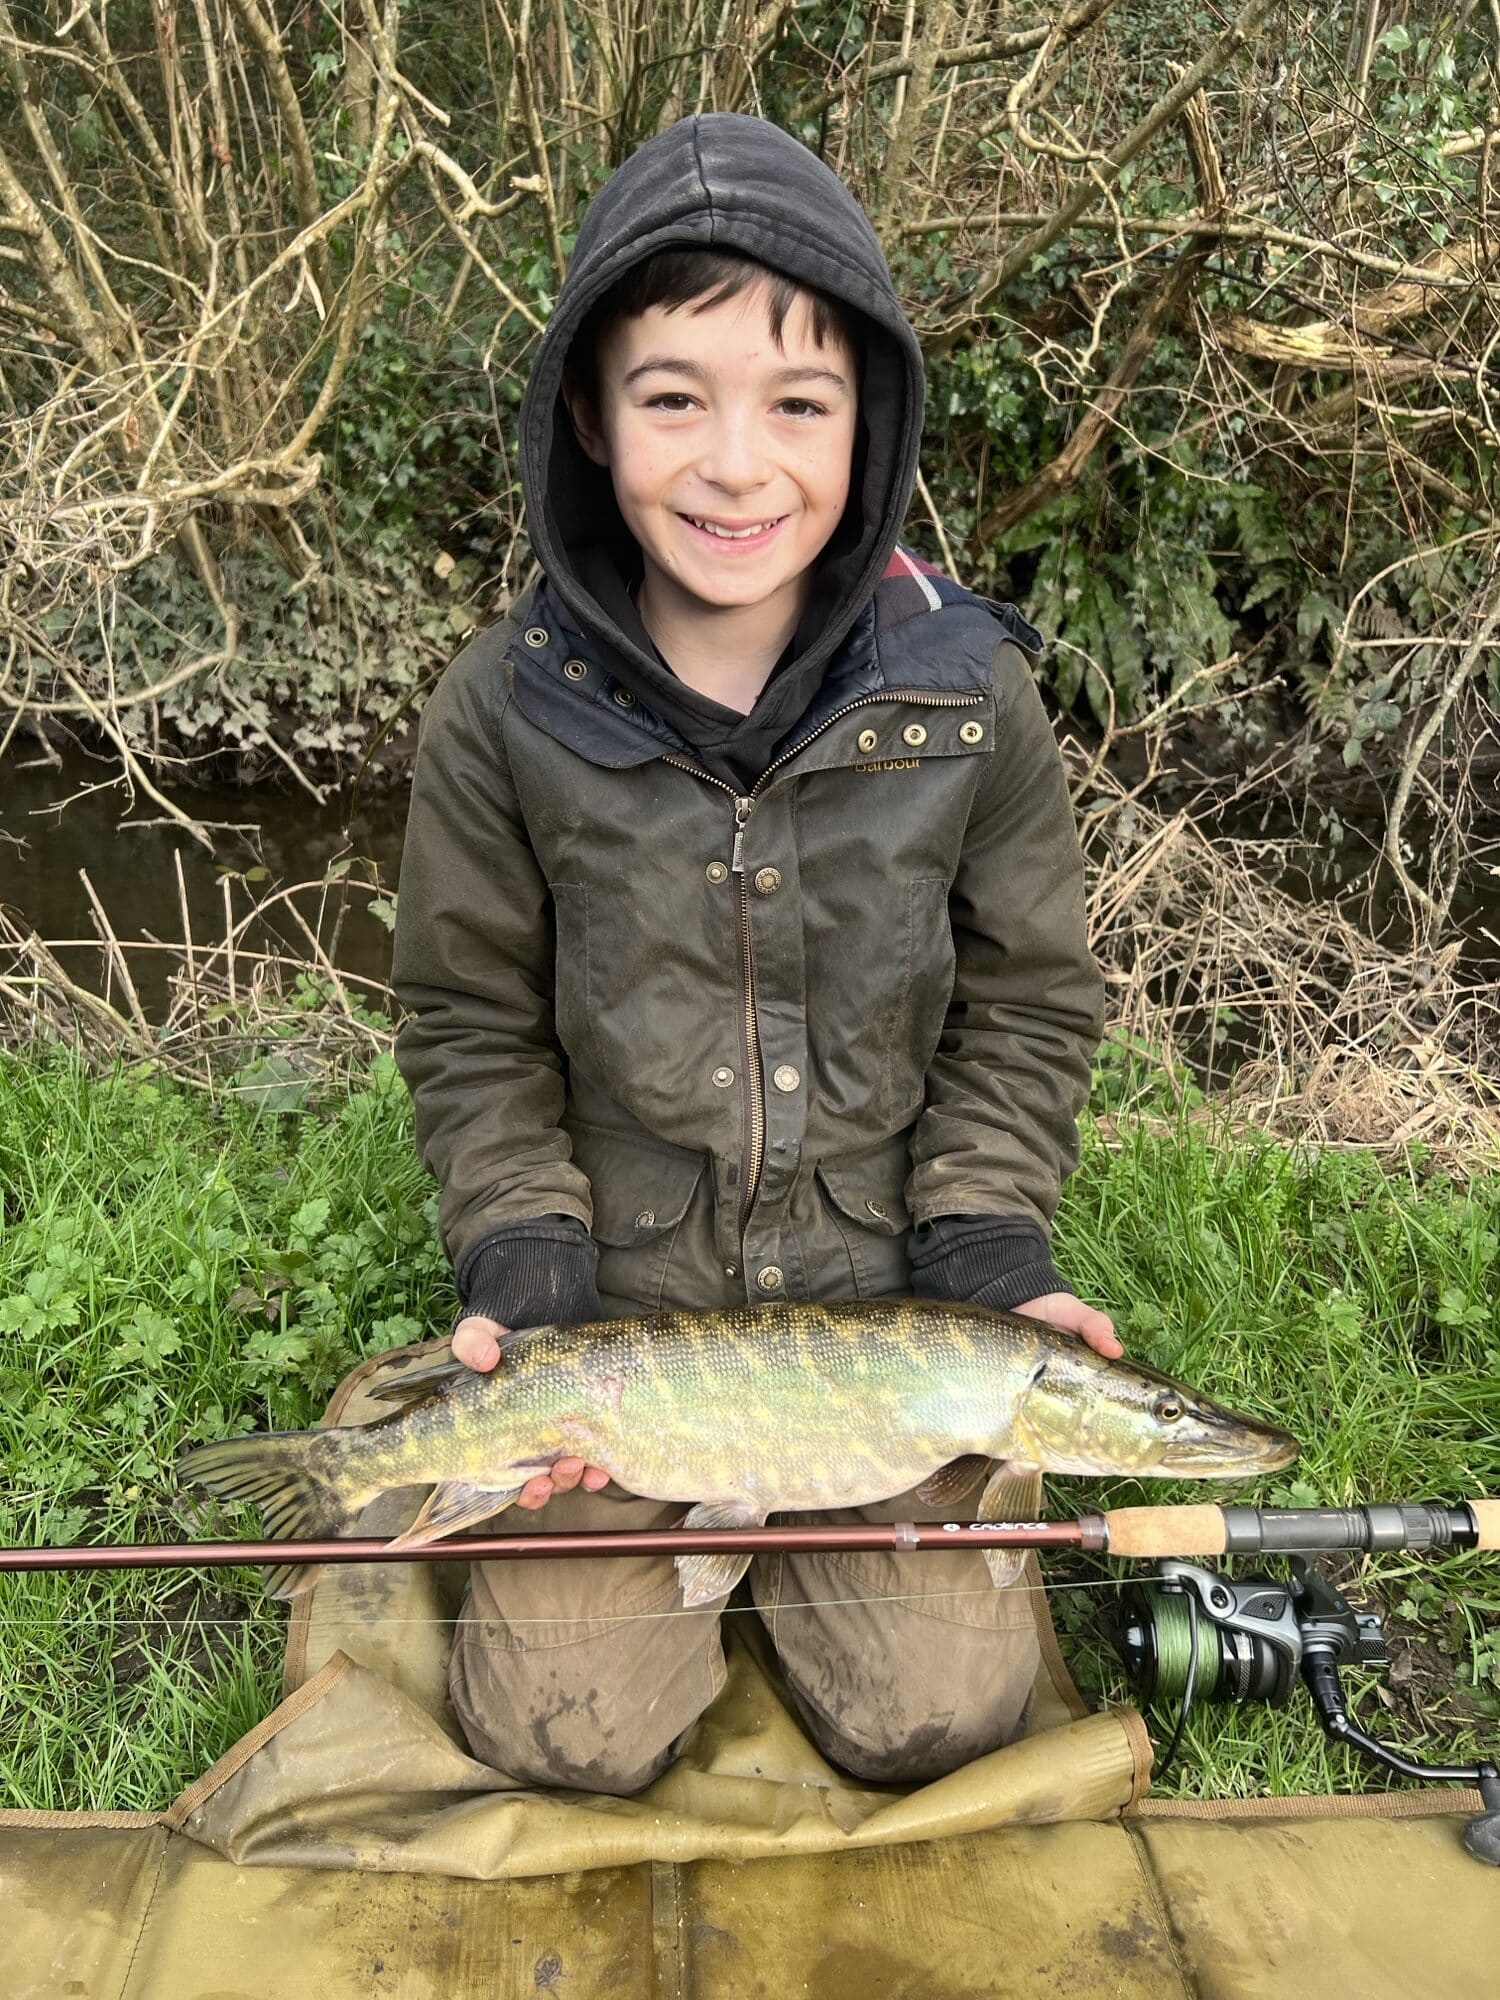 Canal fishing trip on River Barrow yields perch and pike